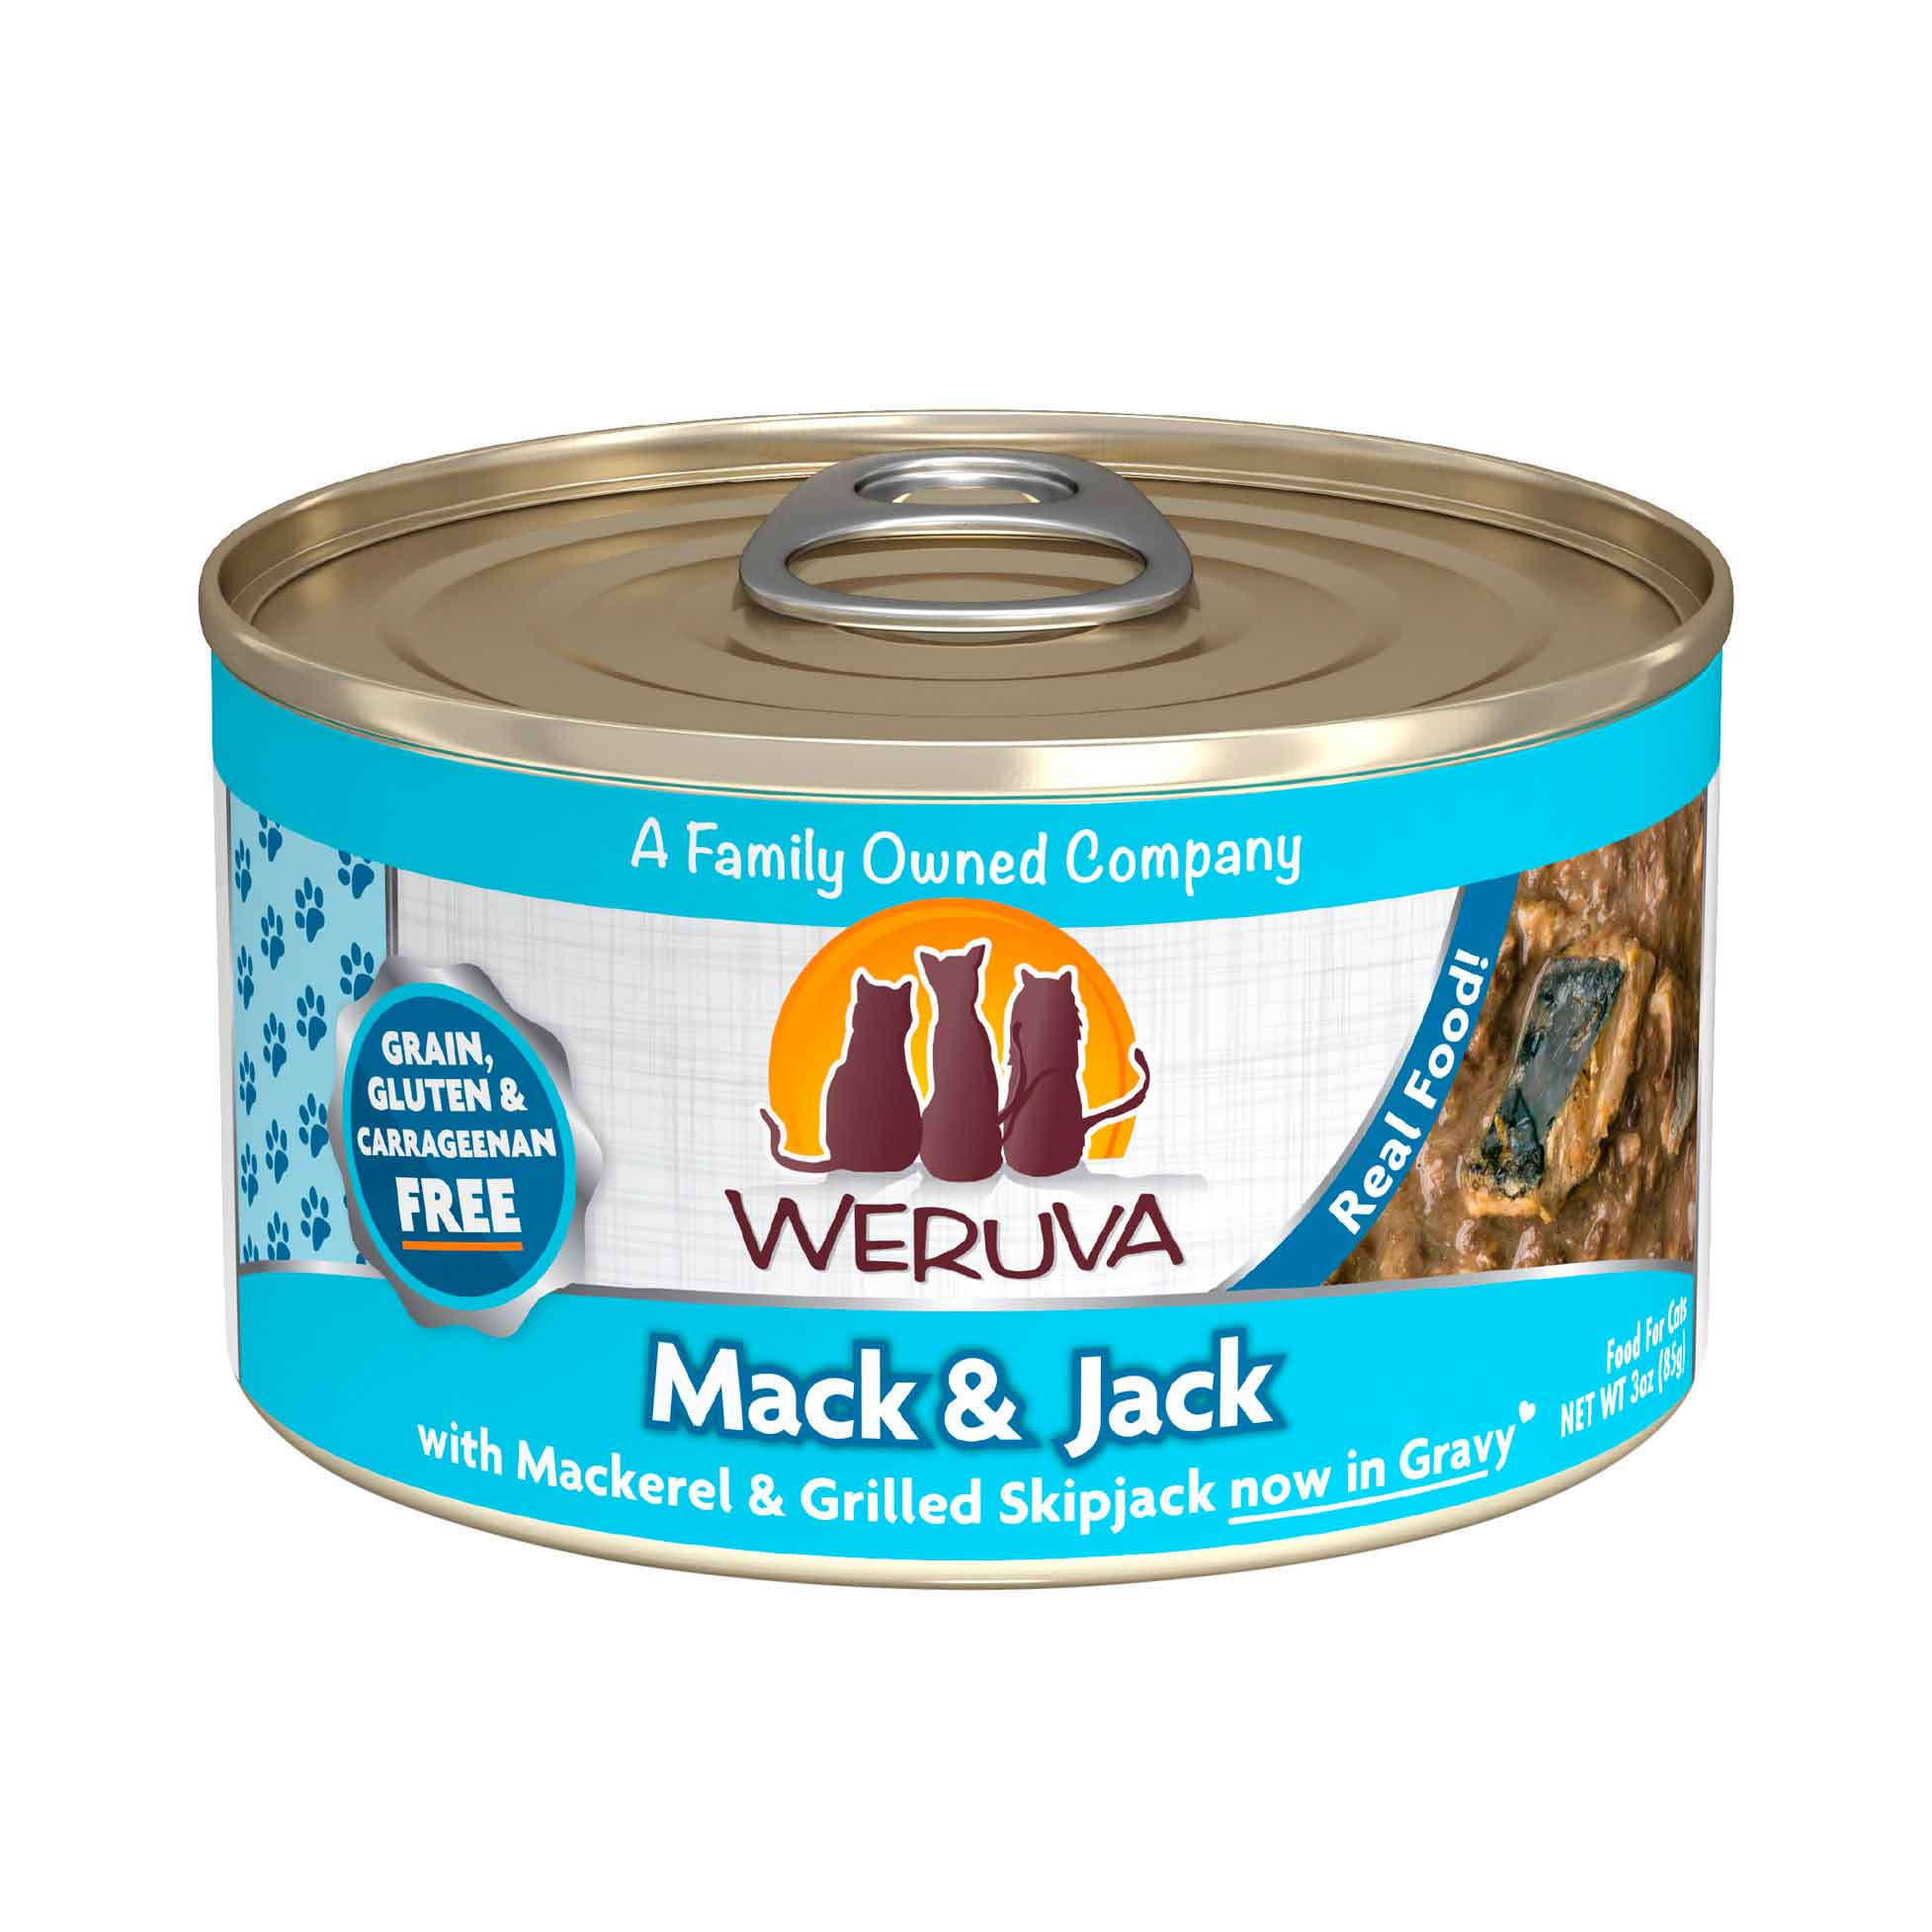 Weruva Classic Wet Cat Food, Mack & Jack with Mackerel & Grilled Skipjack in Gravy, 3 Ounce Can